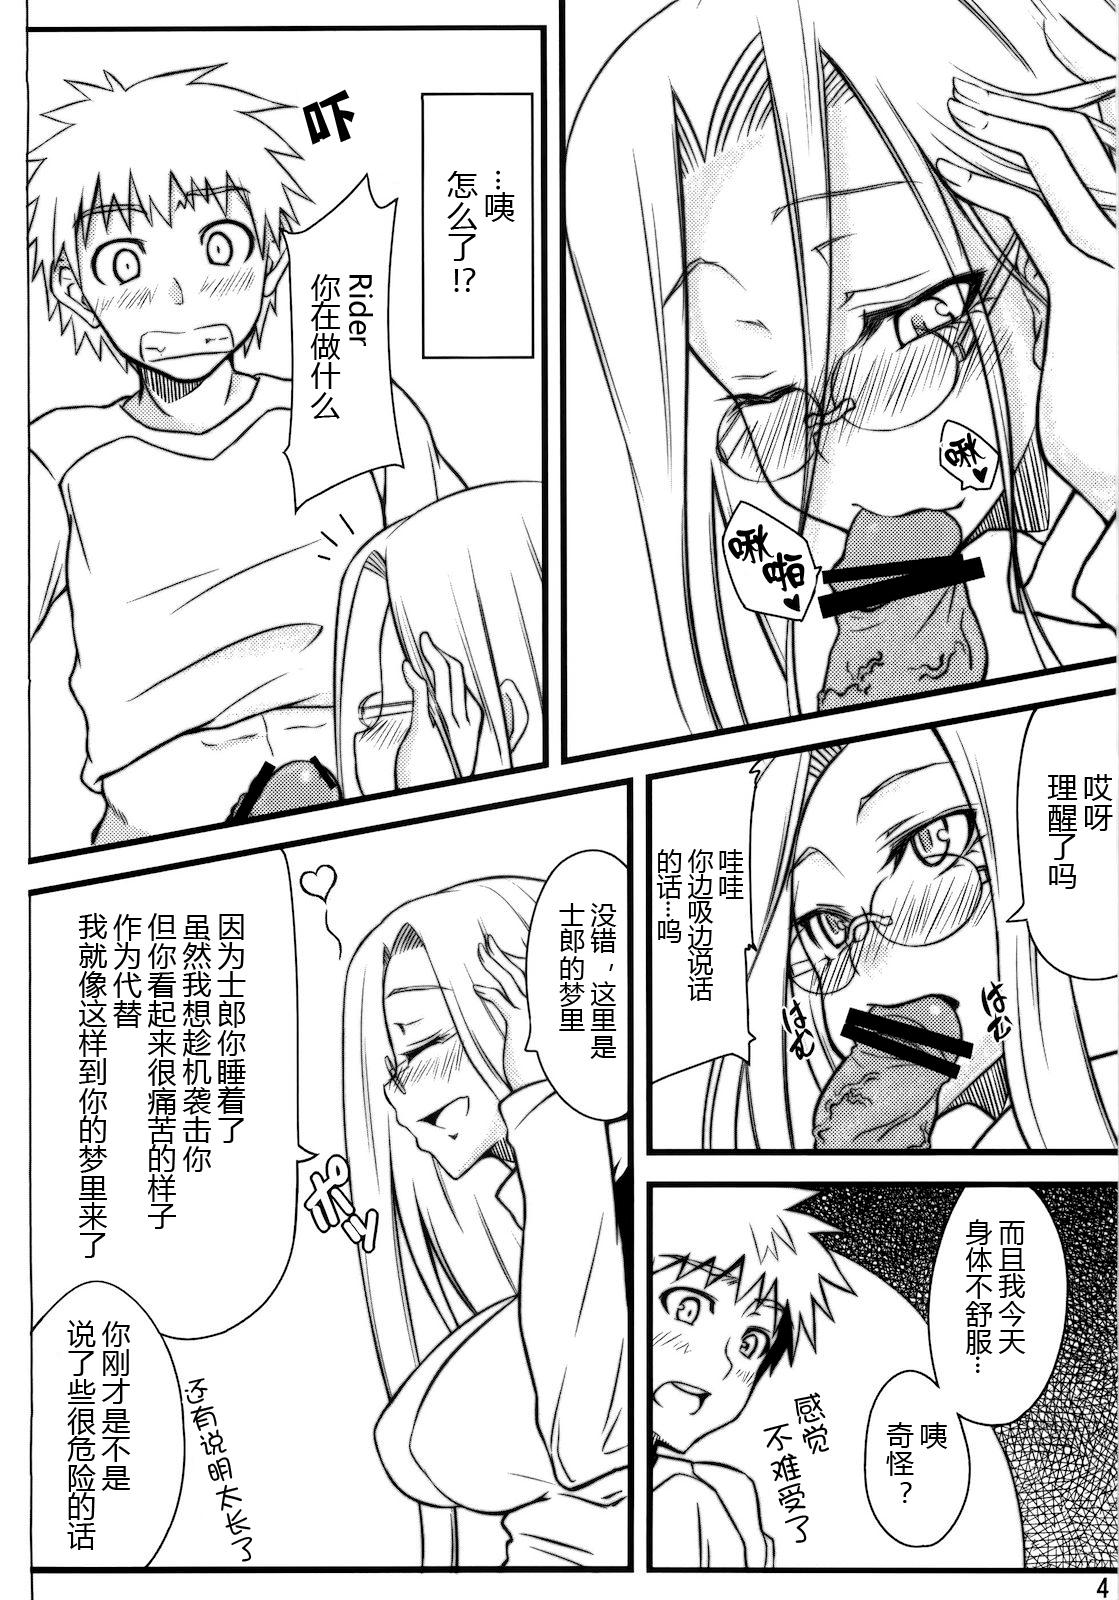 Step Mom R5 - Fate stay night Fate hollow ataraxia Kiss - Page 4